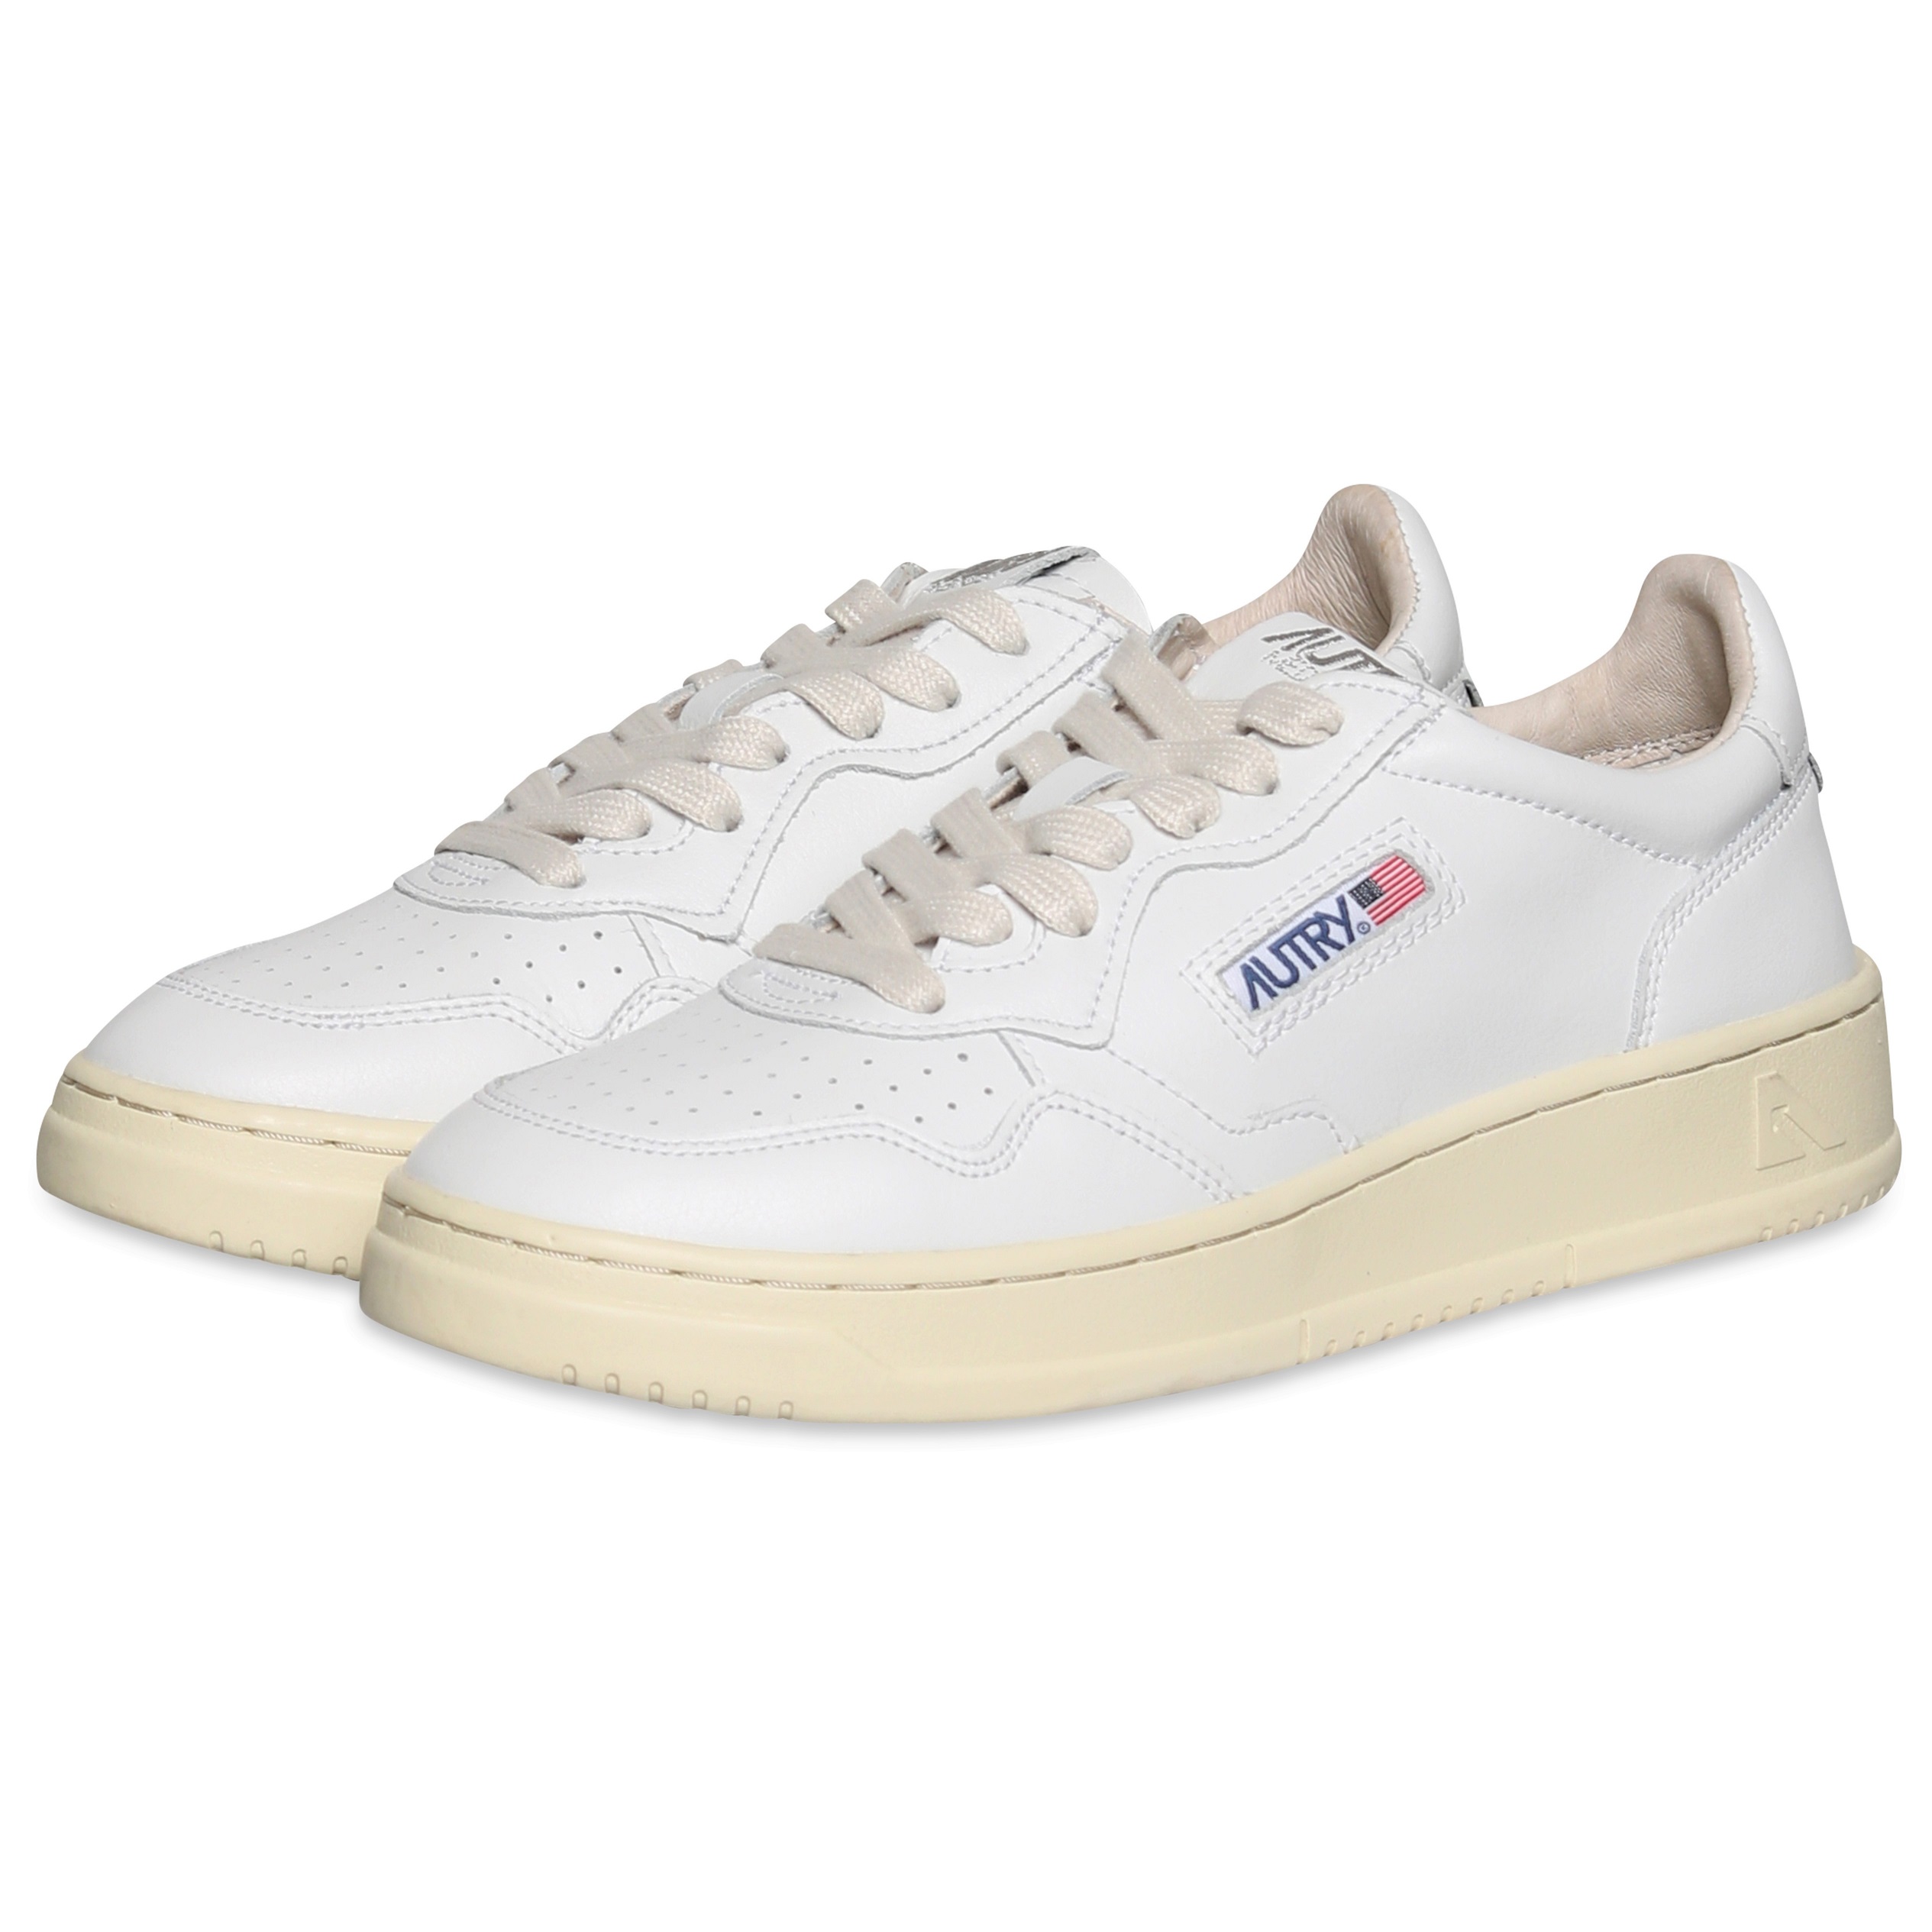 Autry Action Shoes Low Sneaker White/Draw Action 35